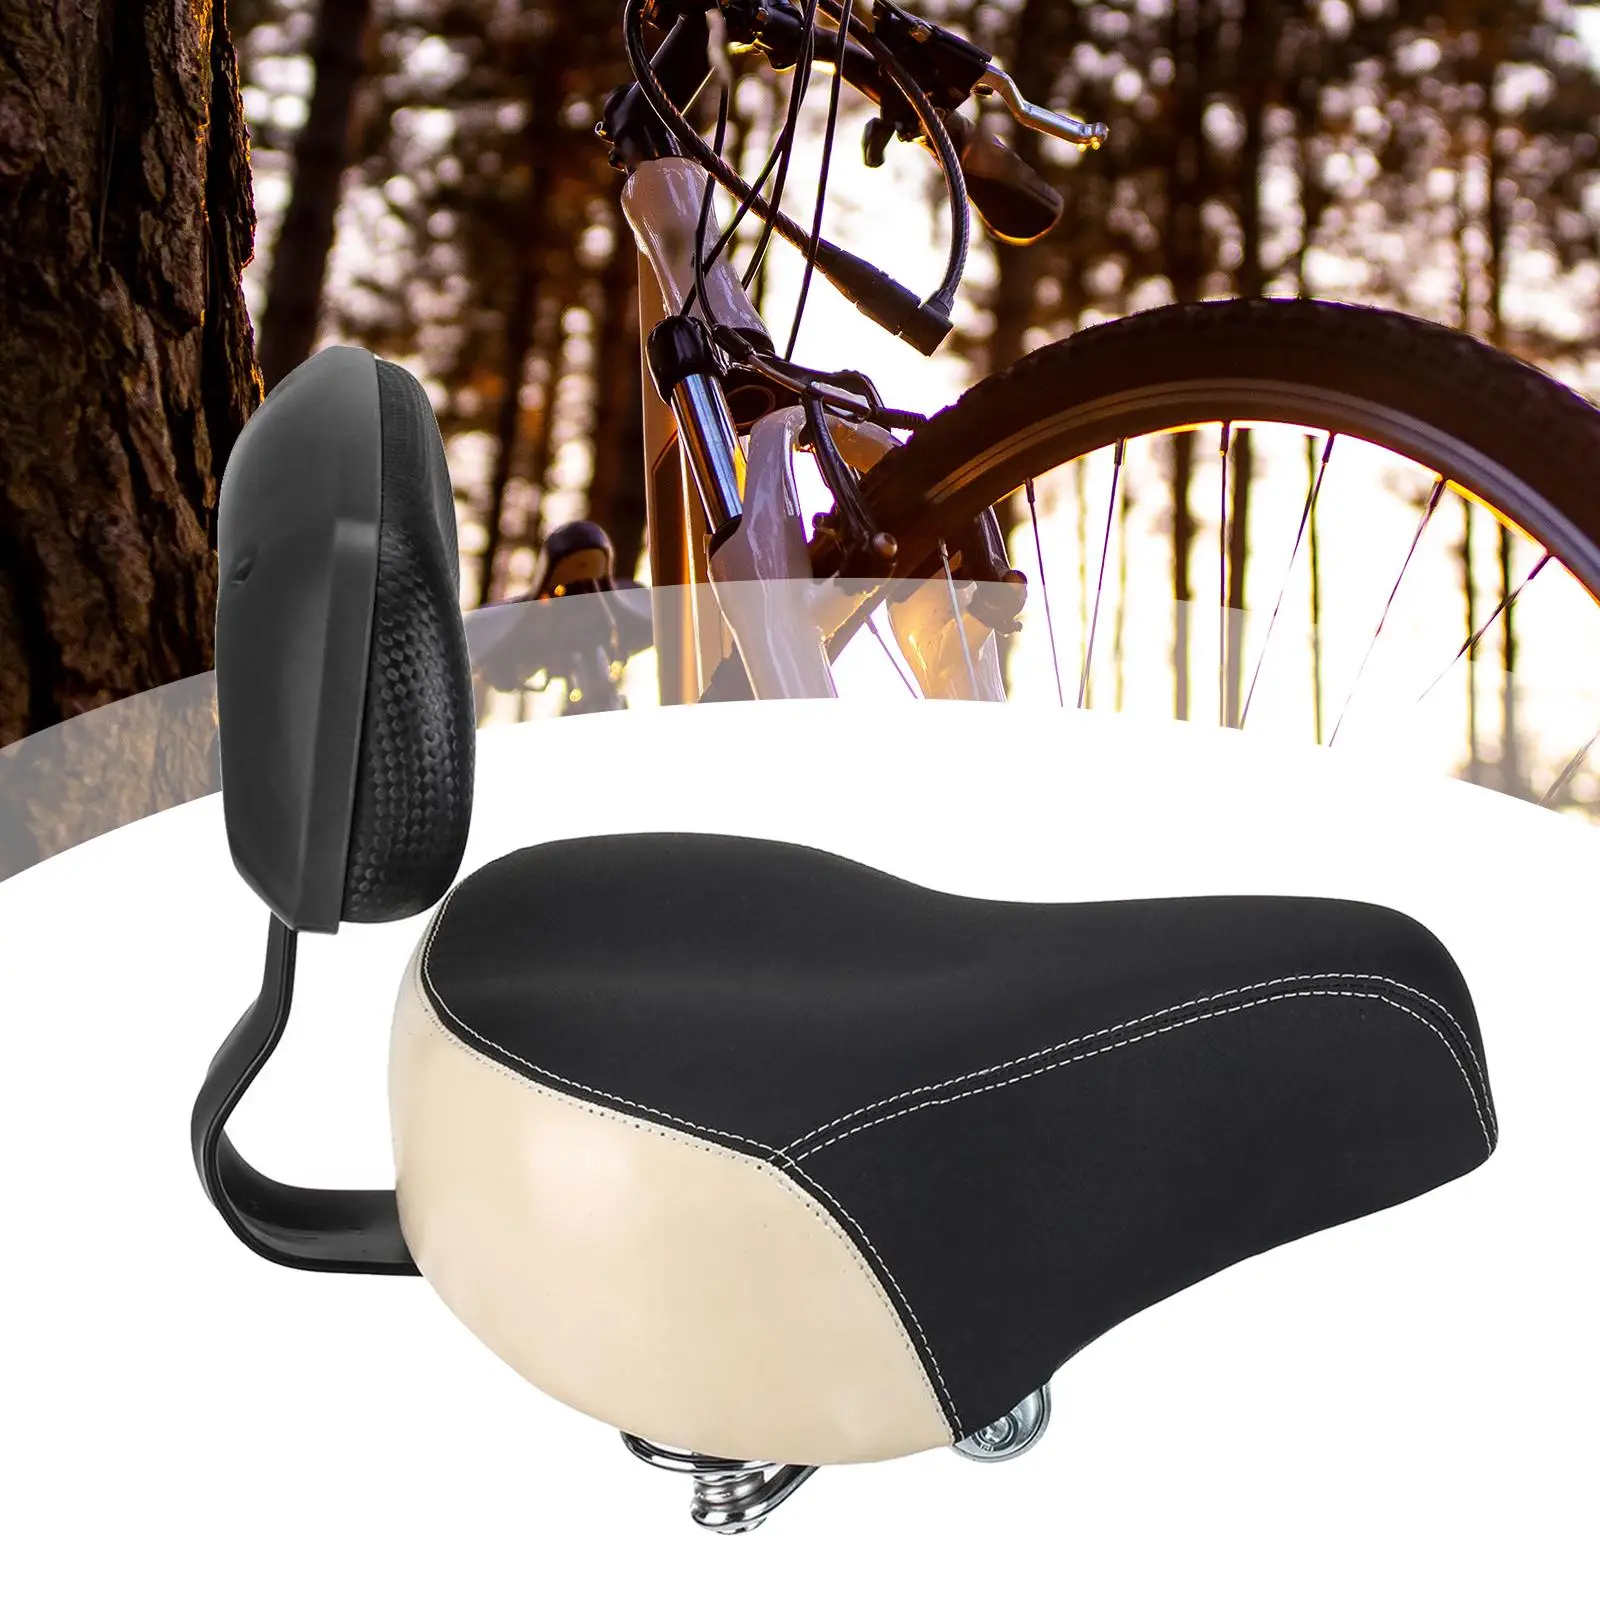 Comfortable Seat Saddle with Backrest Cover Seat Cushion for Men